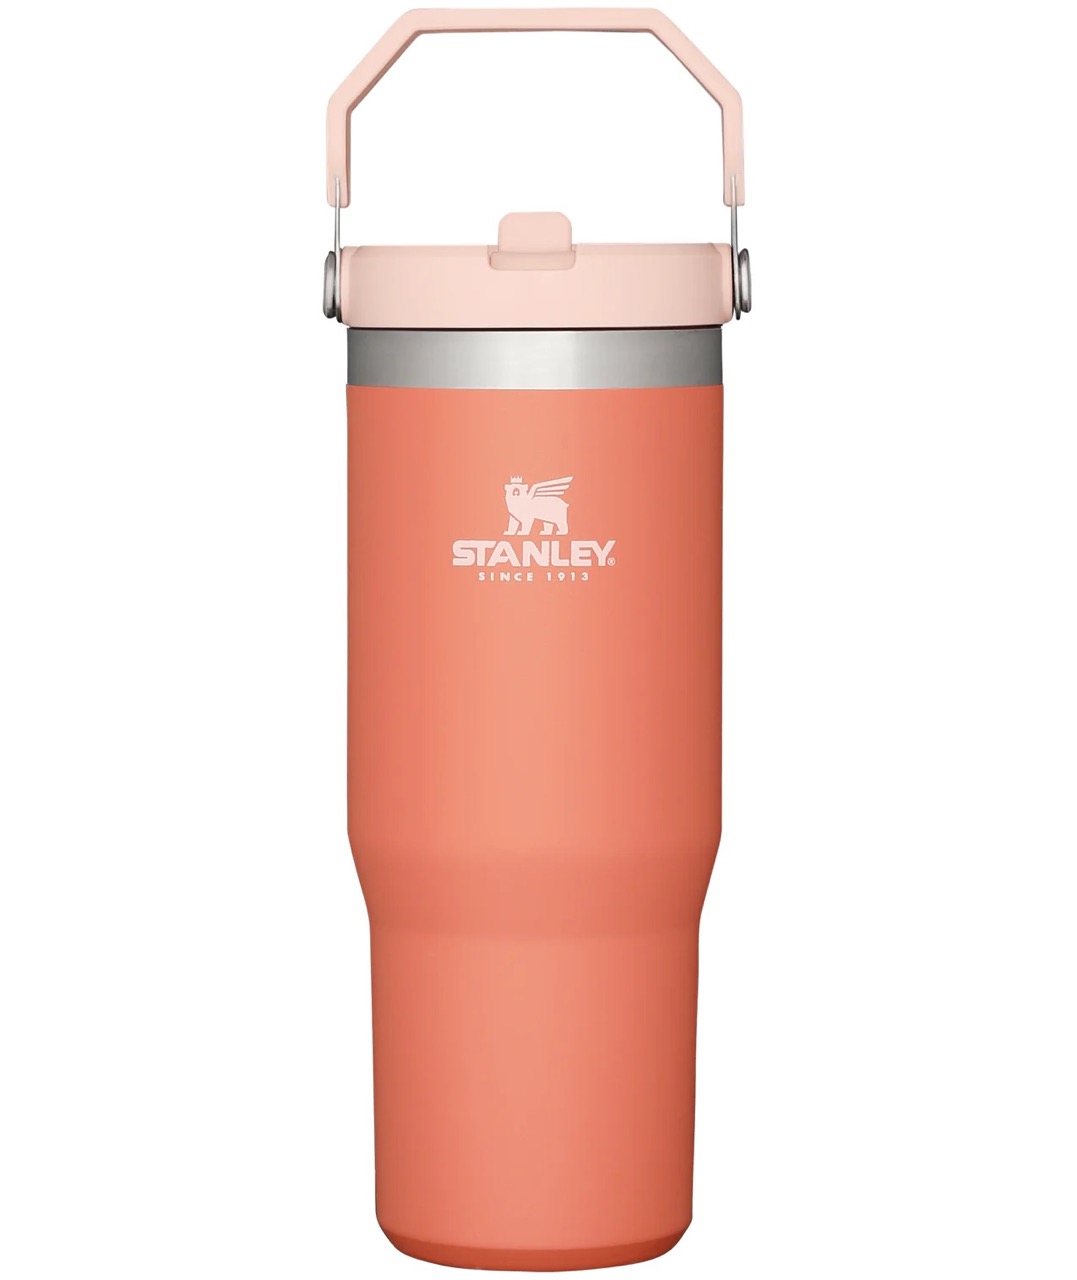  Rivers Edge Products Insulated Metal Water Bottle, Stainless  Steel Thermal Vacuum Flask, Unique Bullet Tumbler for Hiking, Traveling, or  Workout, 34 oz, Rifle Cartridge : Sports & Outdoors